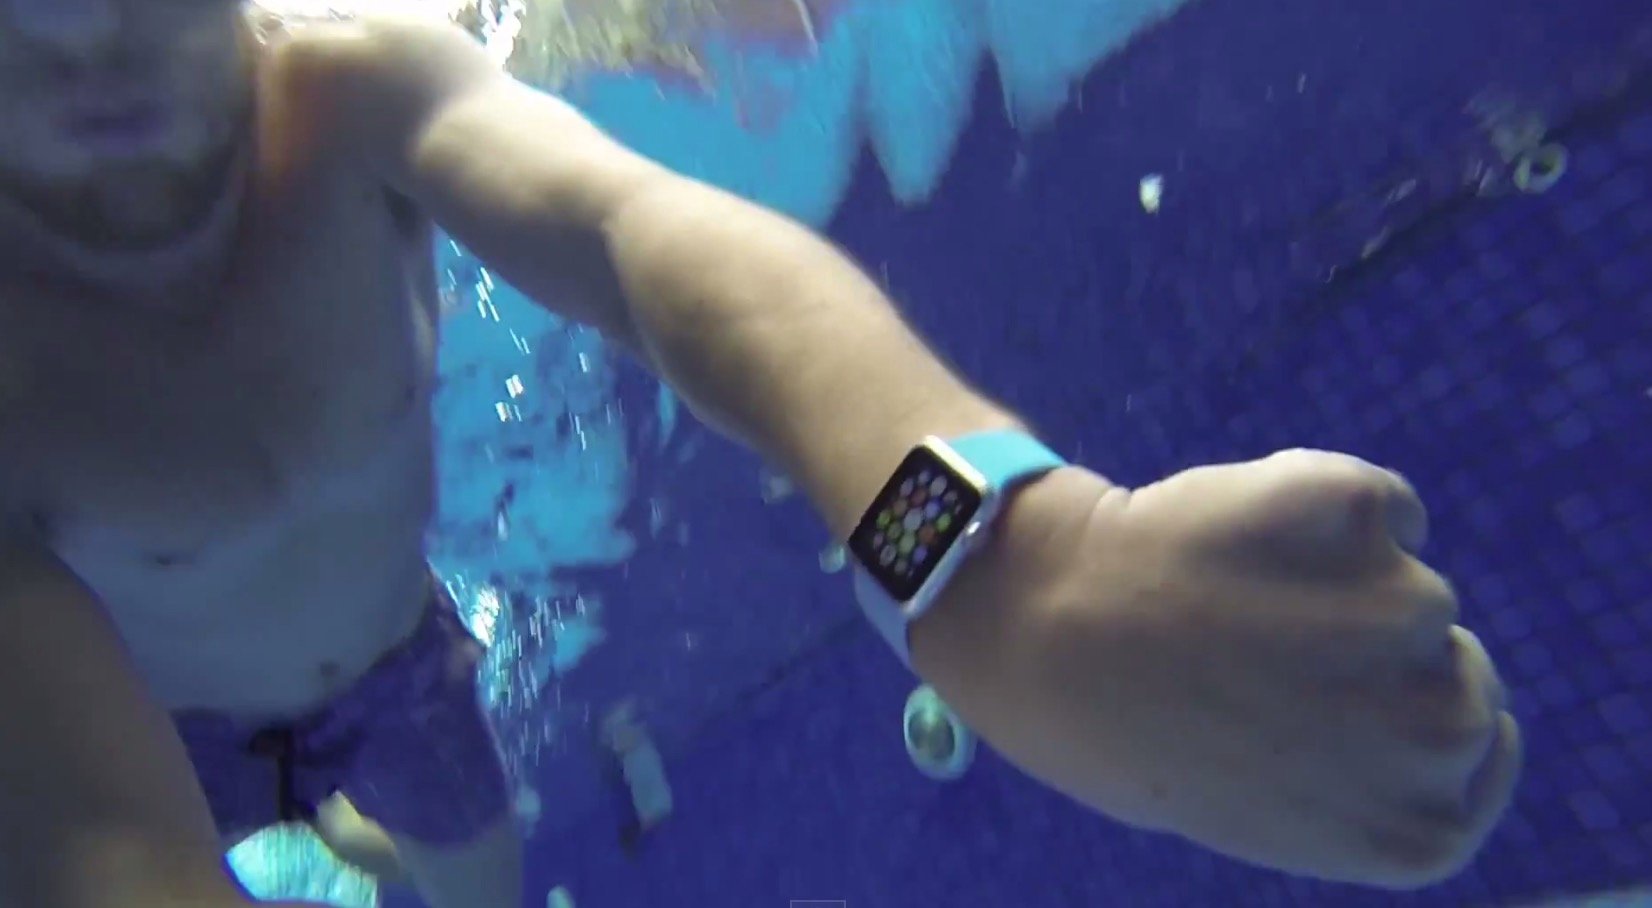 The Apple Watch waterproof text video shows that it can withstand a lot of torture.